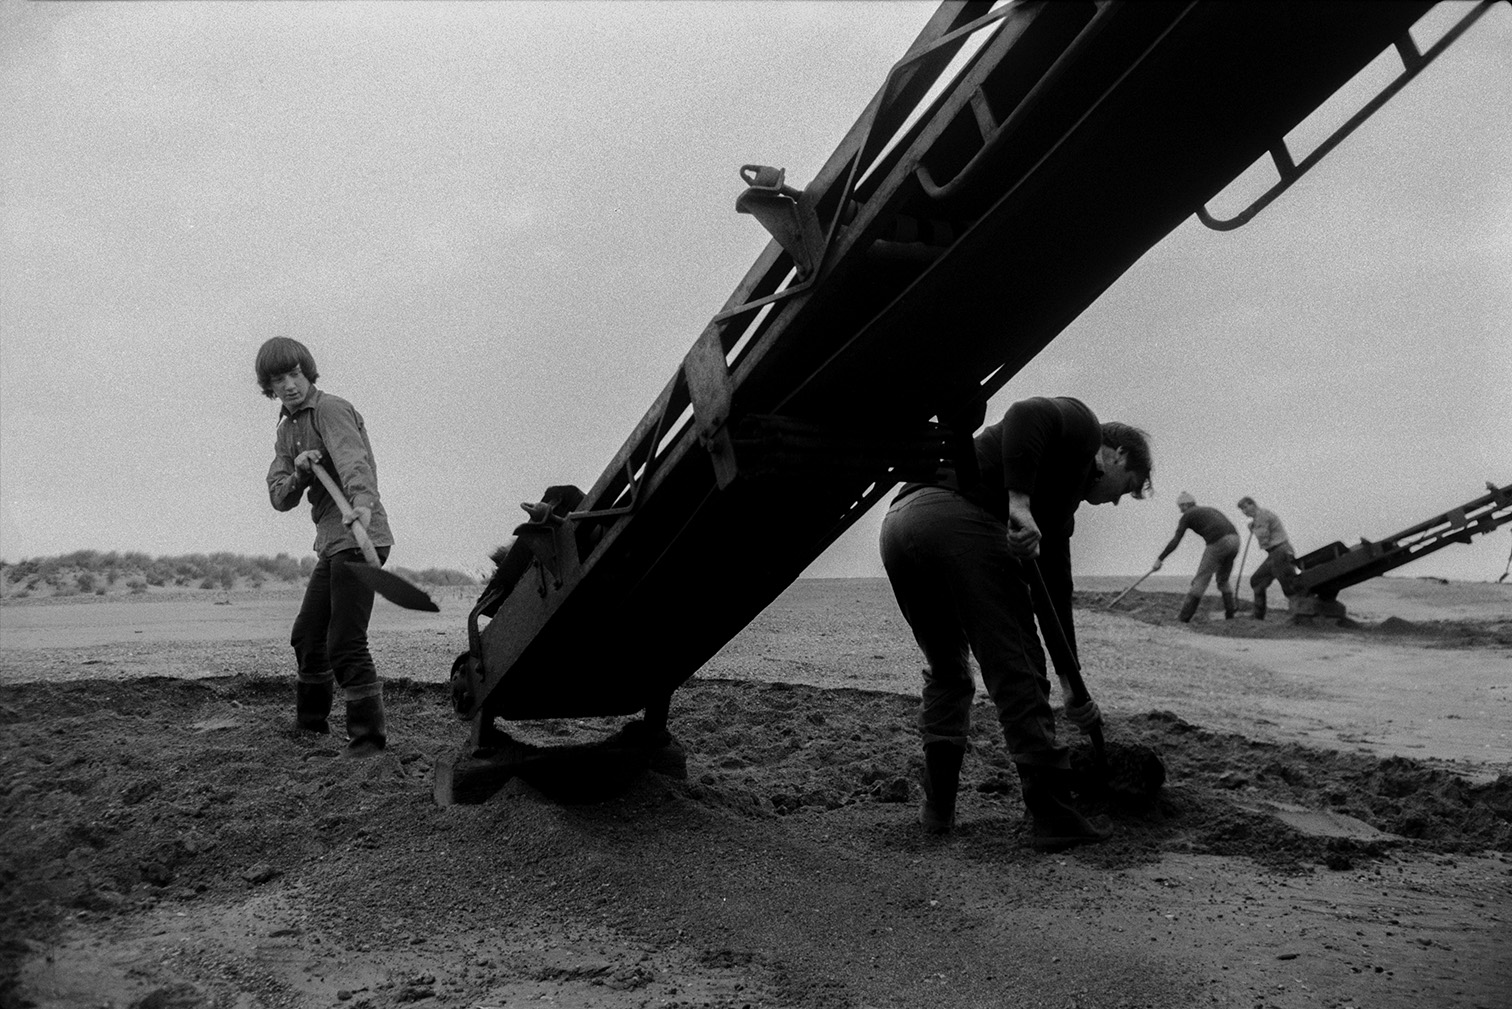 Men shovelling sand from the beach onto a conveyor belt or elevator attached to a sand barge at Crow Point, Braunton. Two other men loading a sand barge can be seen in the background.